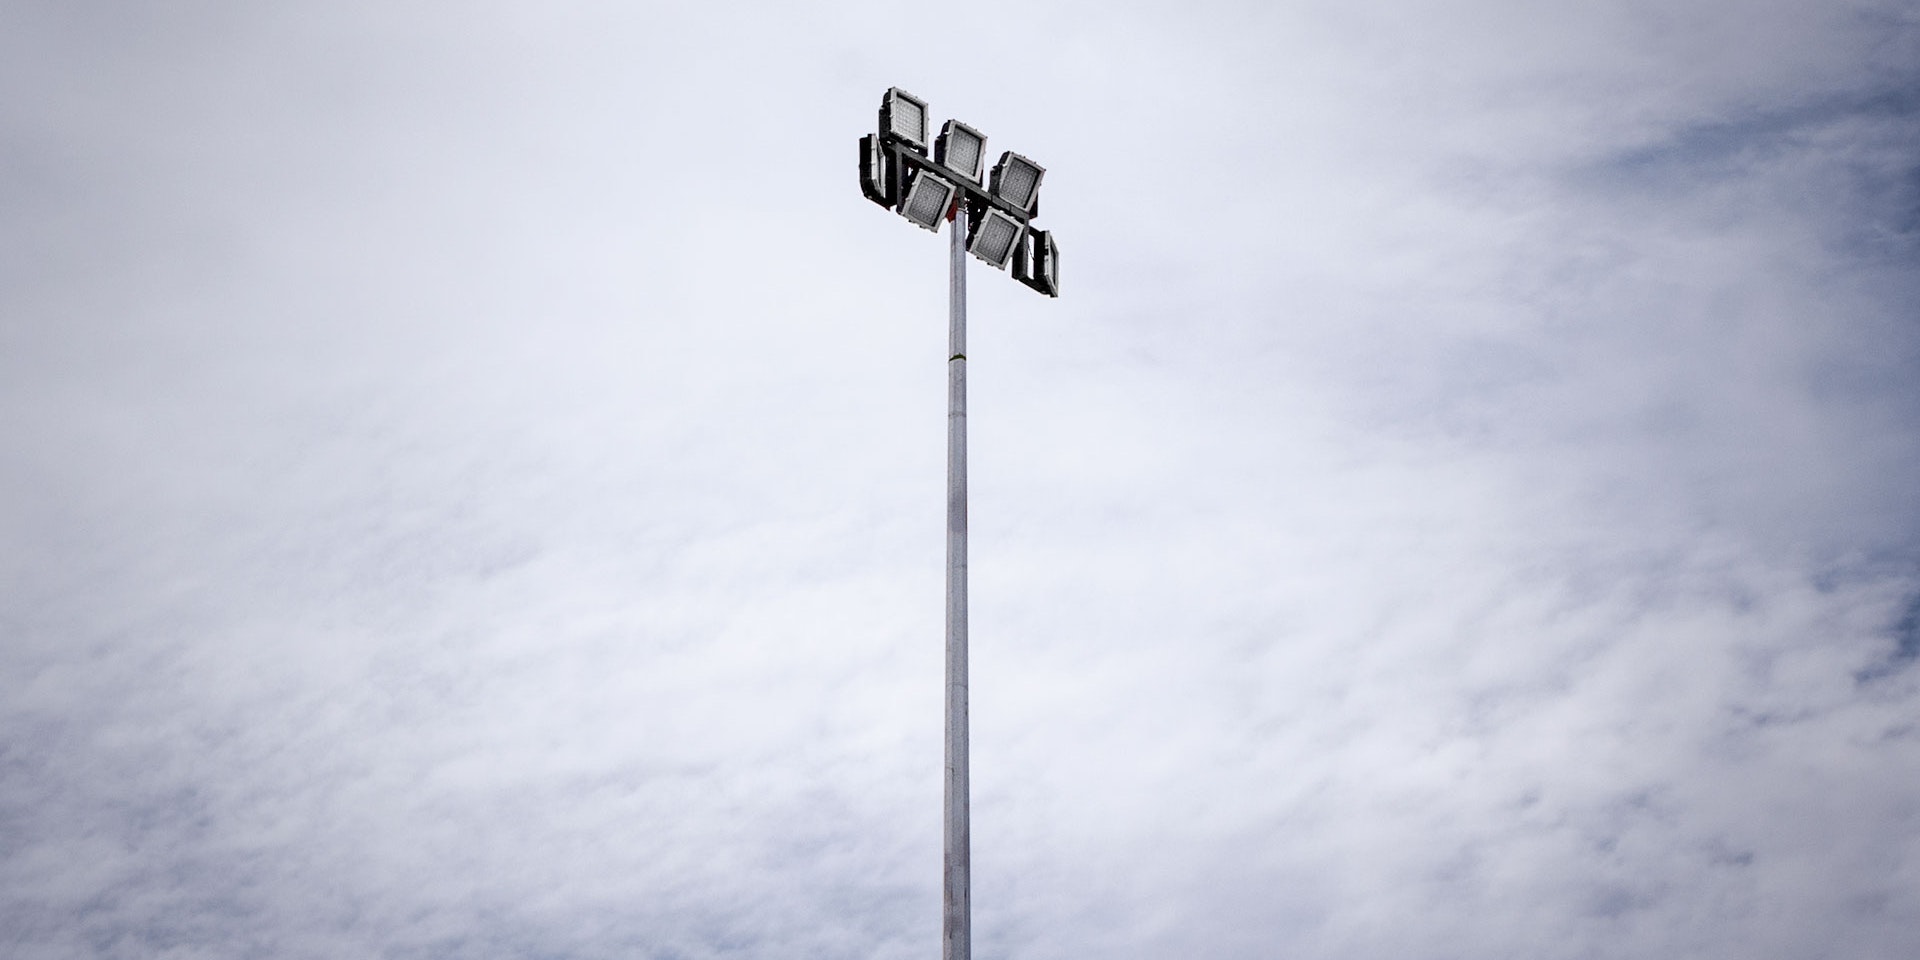 CP66 LED Flood Light in application, installed on a high mast pole on an industrial /  mine site